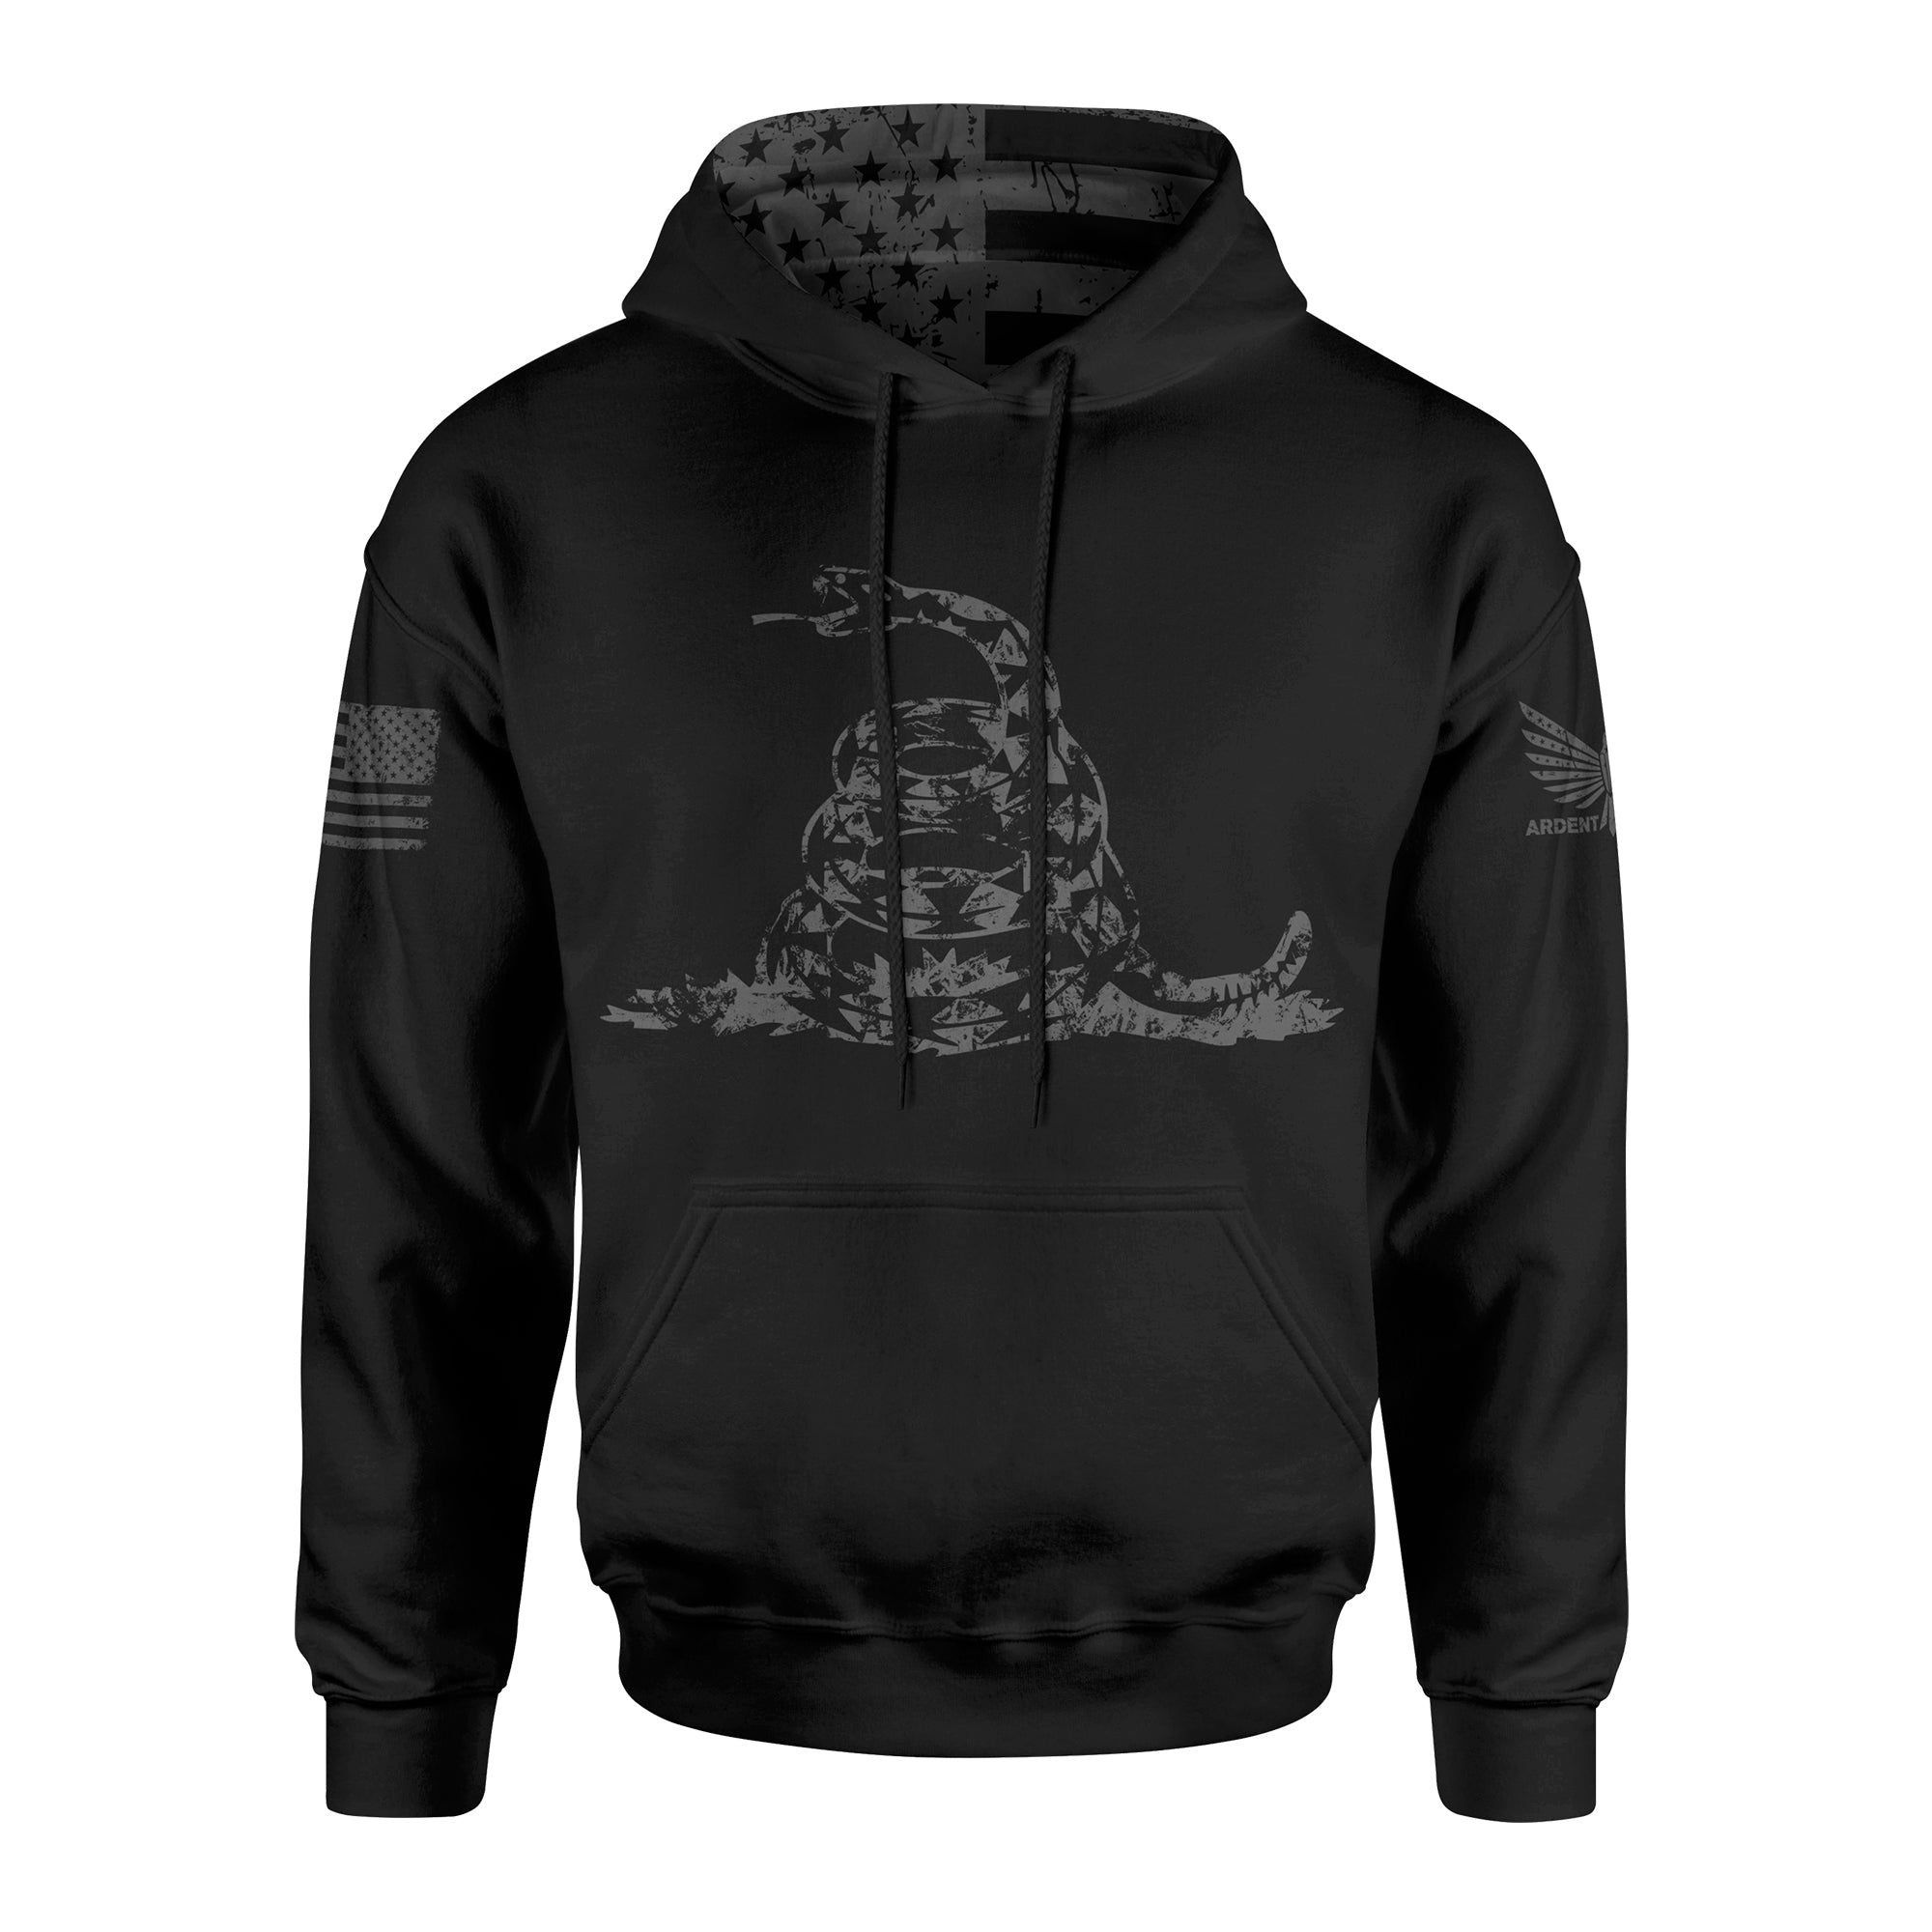 Don't Tread On Me (Black Edition) Hoodie-Premium Hoodie-XS-Ardent Patriot Apparel Co.